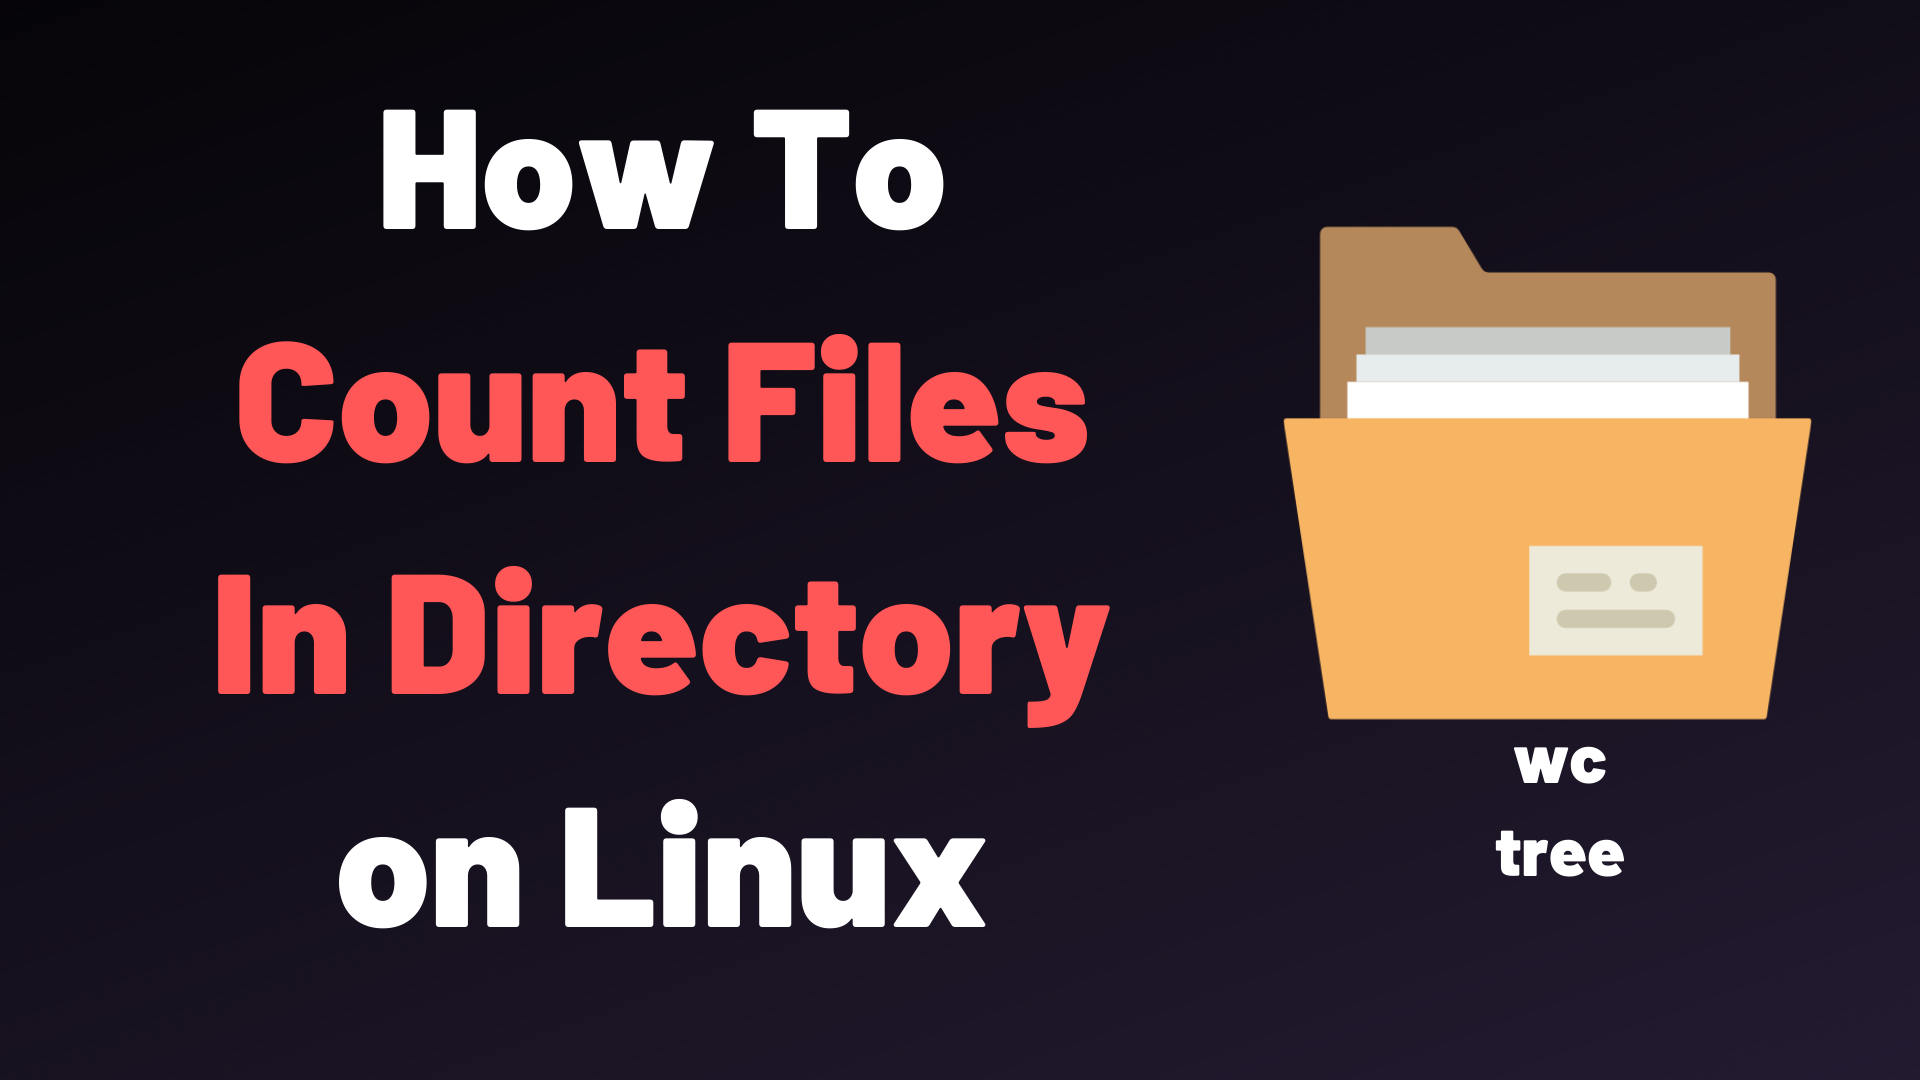 How To Count Files in Directory on Linux